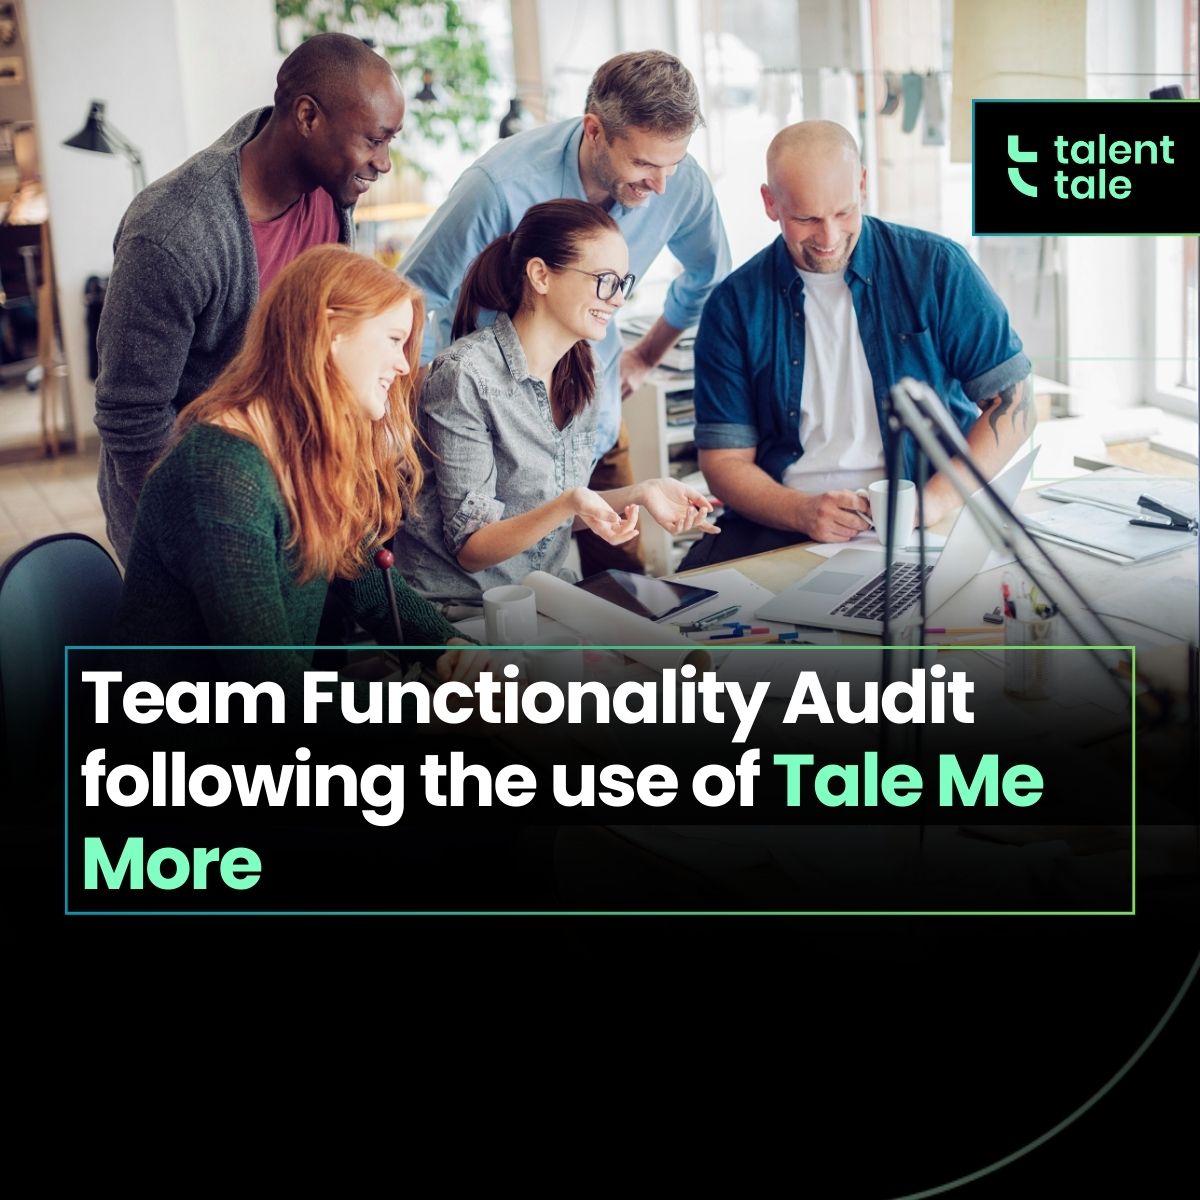 Team Functionality Audit following the use of Tale Me More